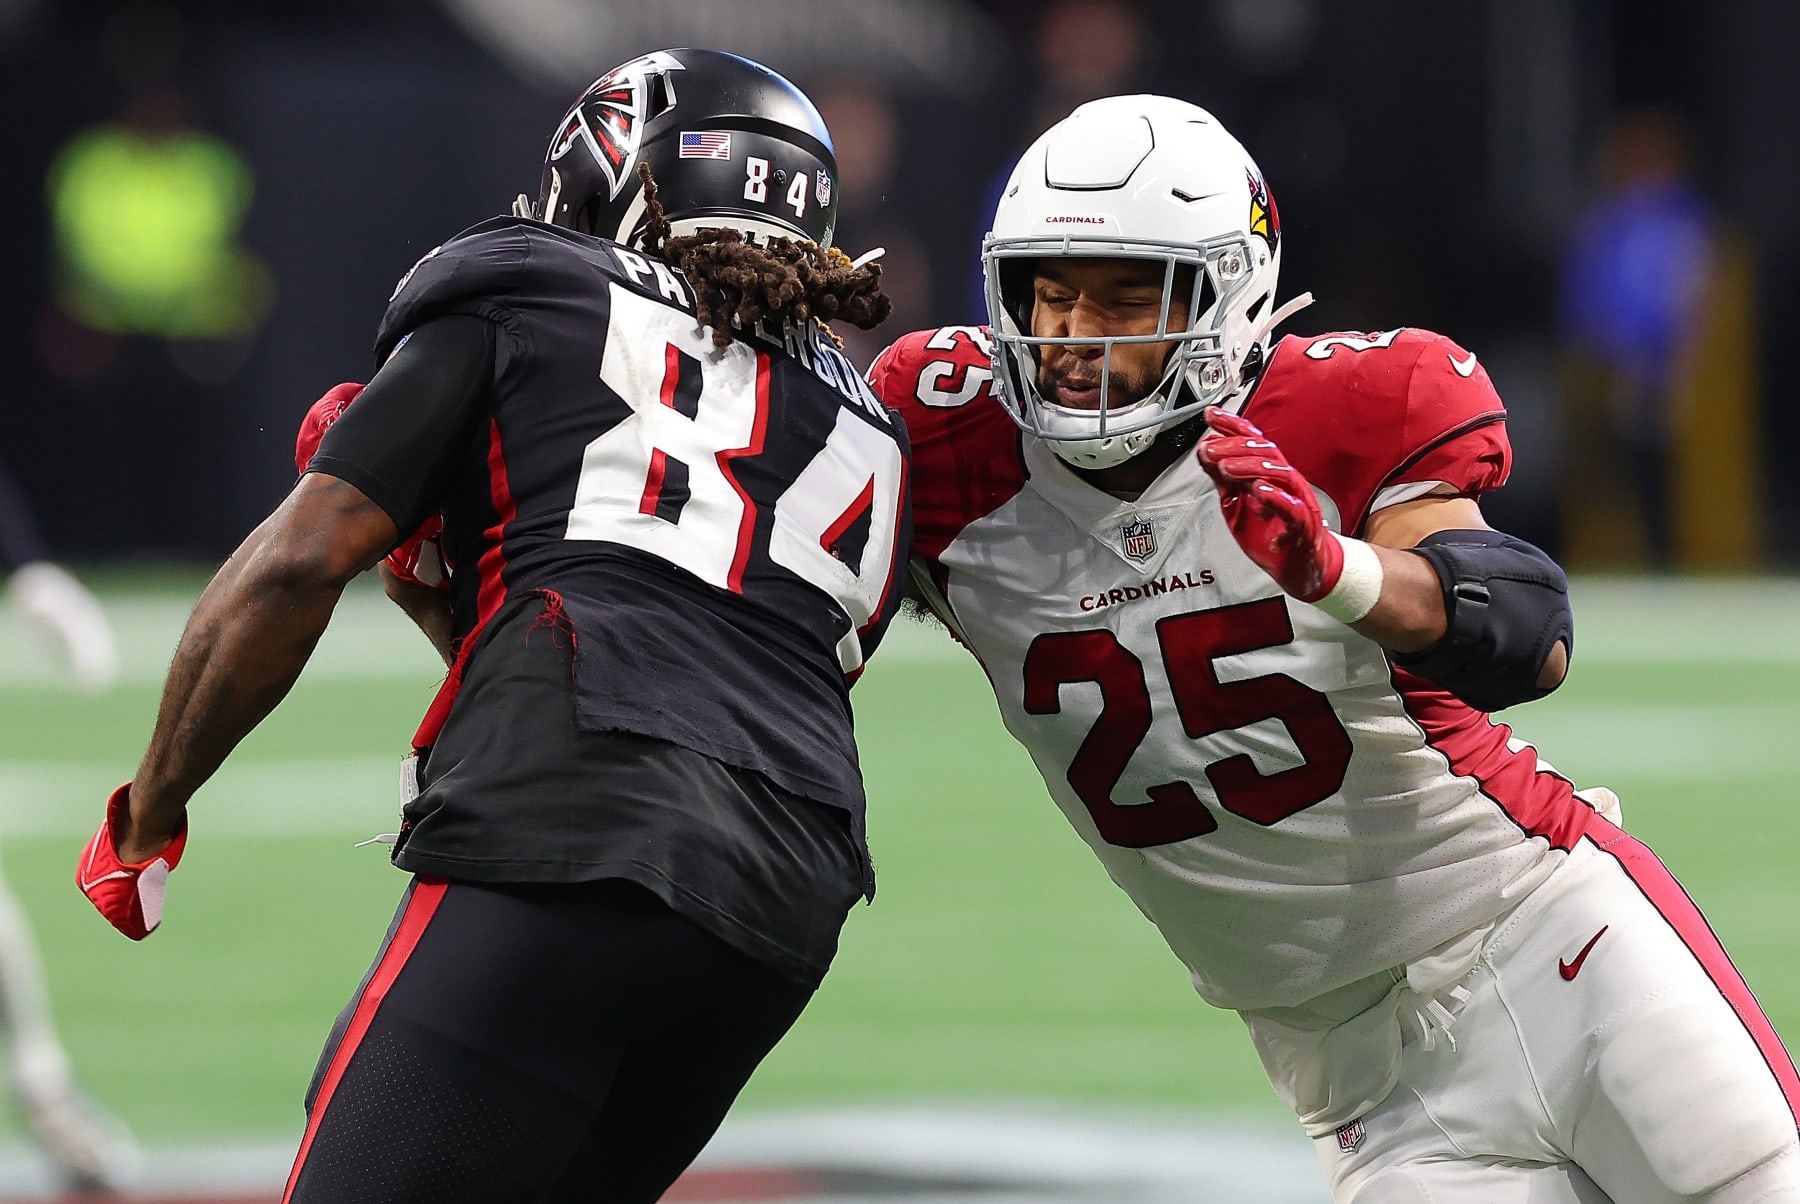 Arizona Cardinals' defense could be one of the lowest rated in the NFL